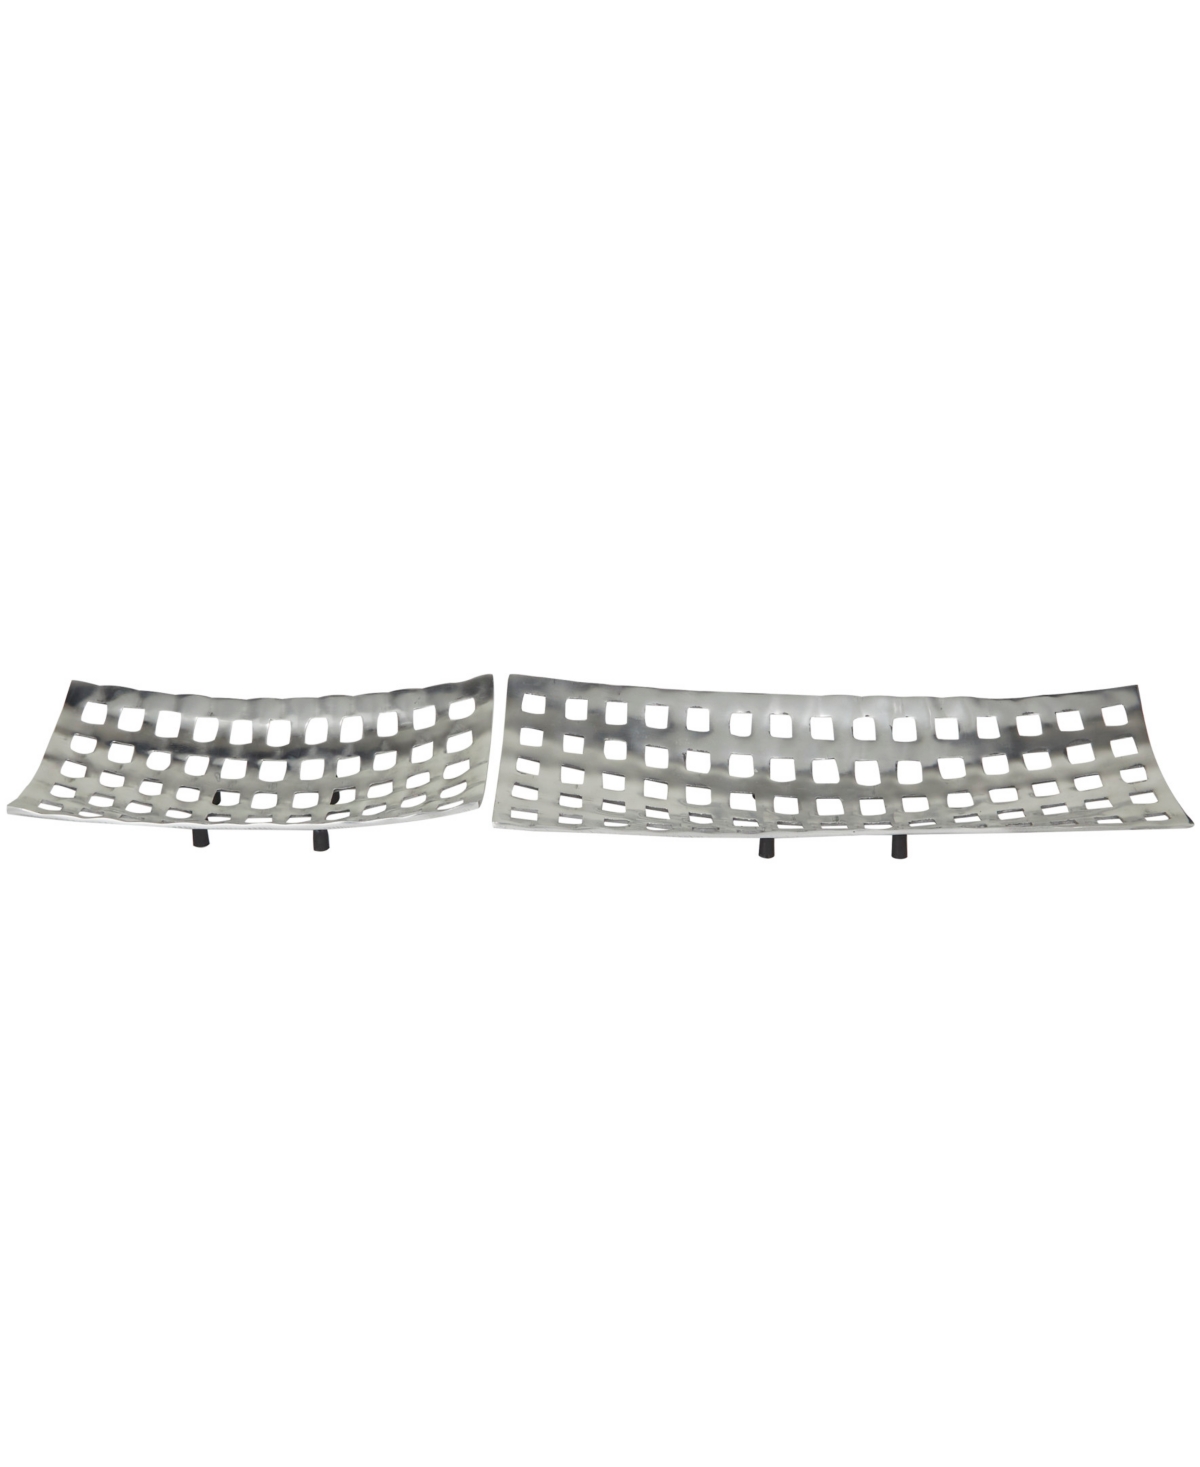 Rosemary Lane Aluminum Tray With Grid Design, Set Of 2, 24", 16" W In Silver